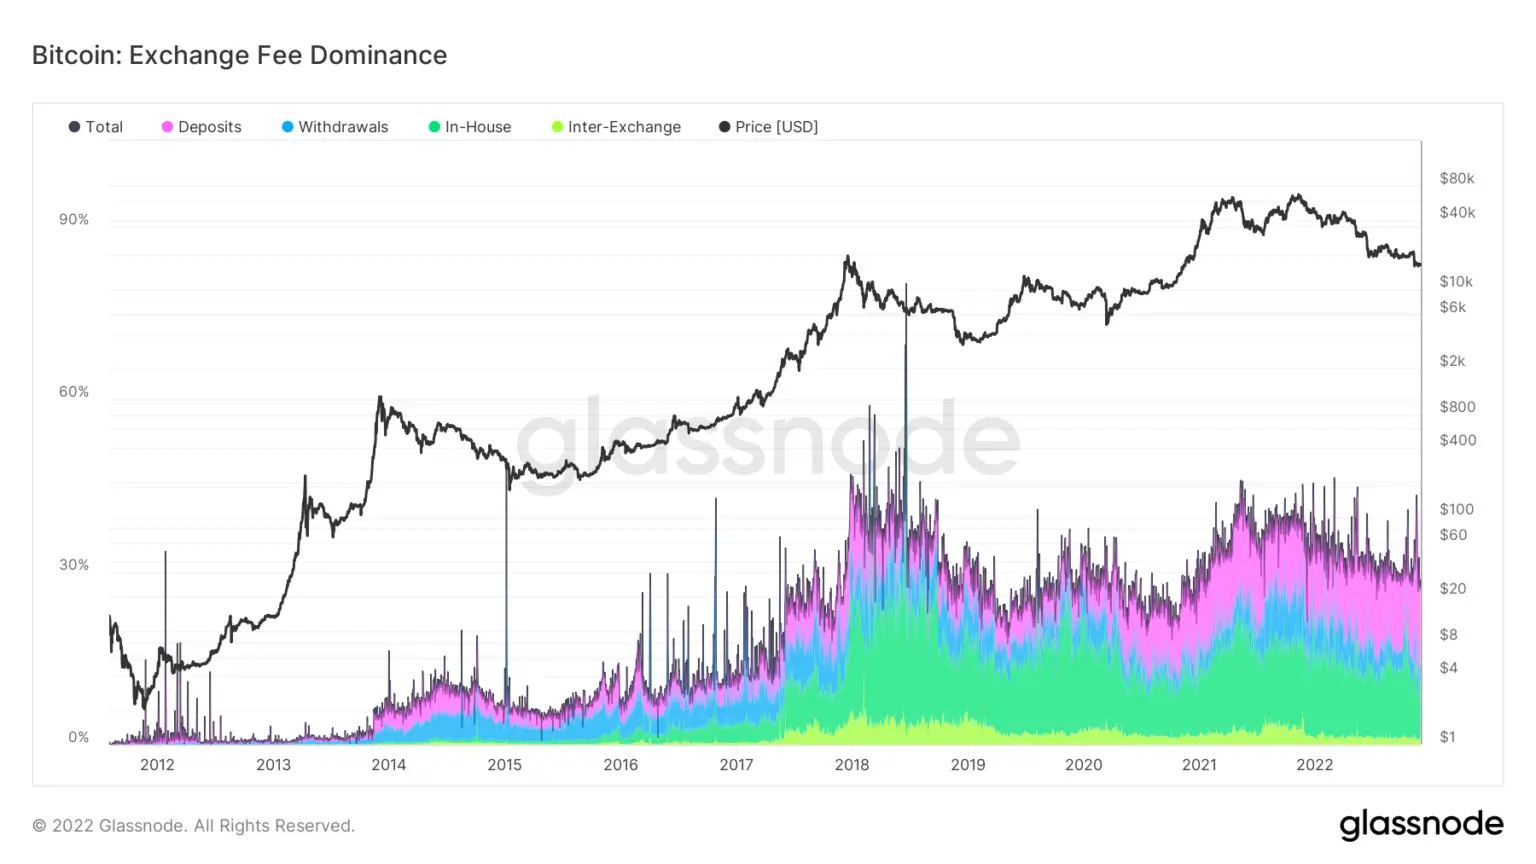 Dominance of Bitcoin Exchange Fees